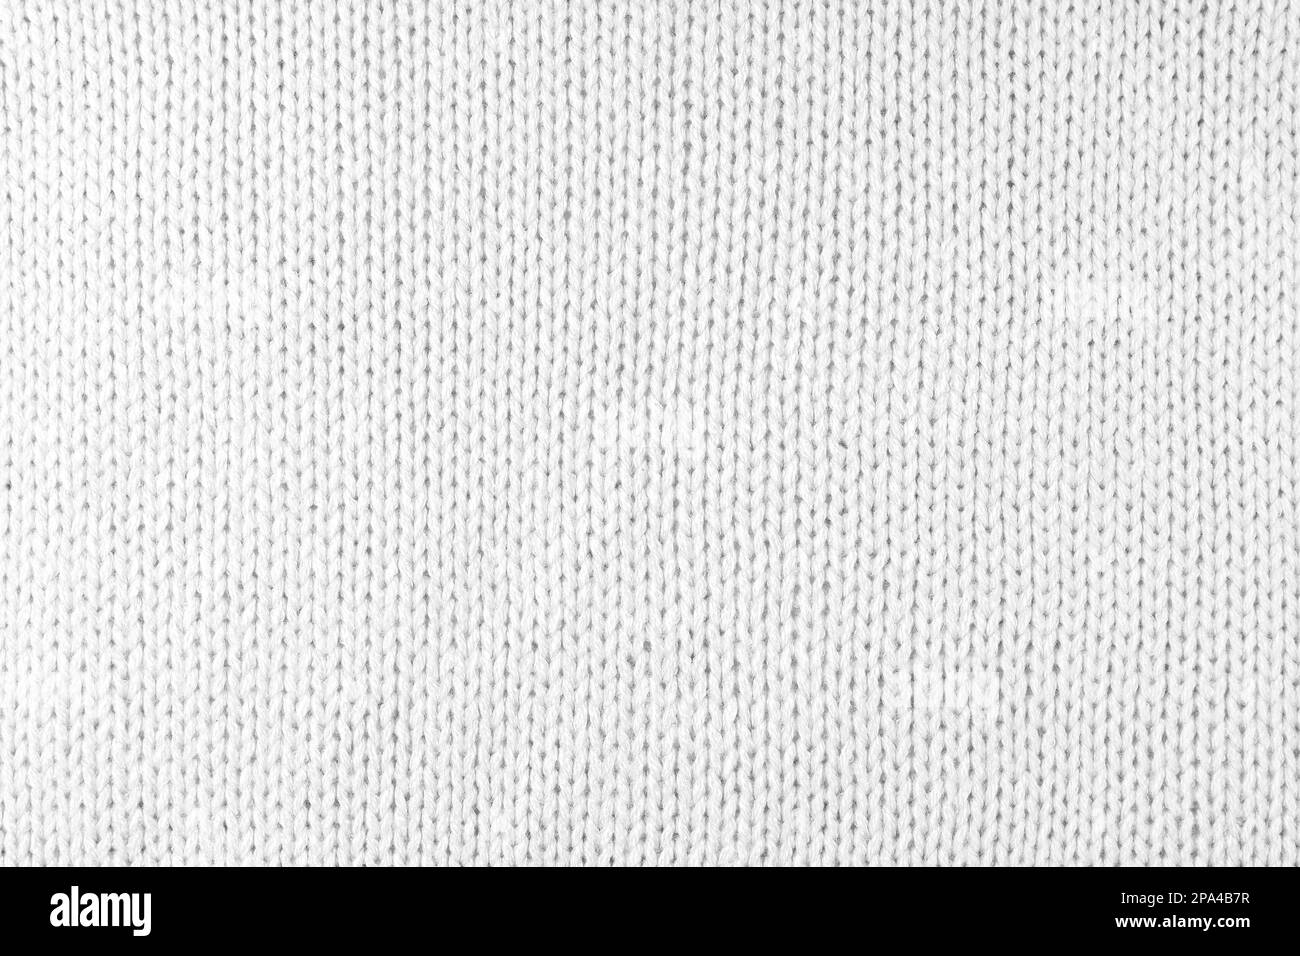 Close up background of knitted wool fabric made of viscose yarn. White color wool knitwear texture. Abstract knitted jersey background. Fabric abstrac Stock Photo